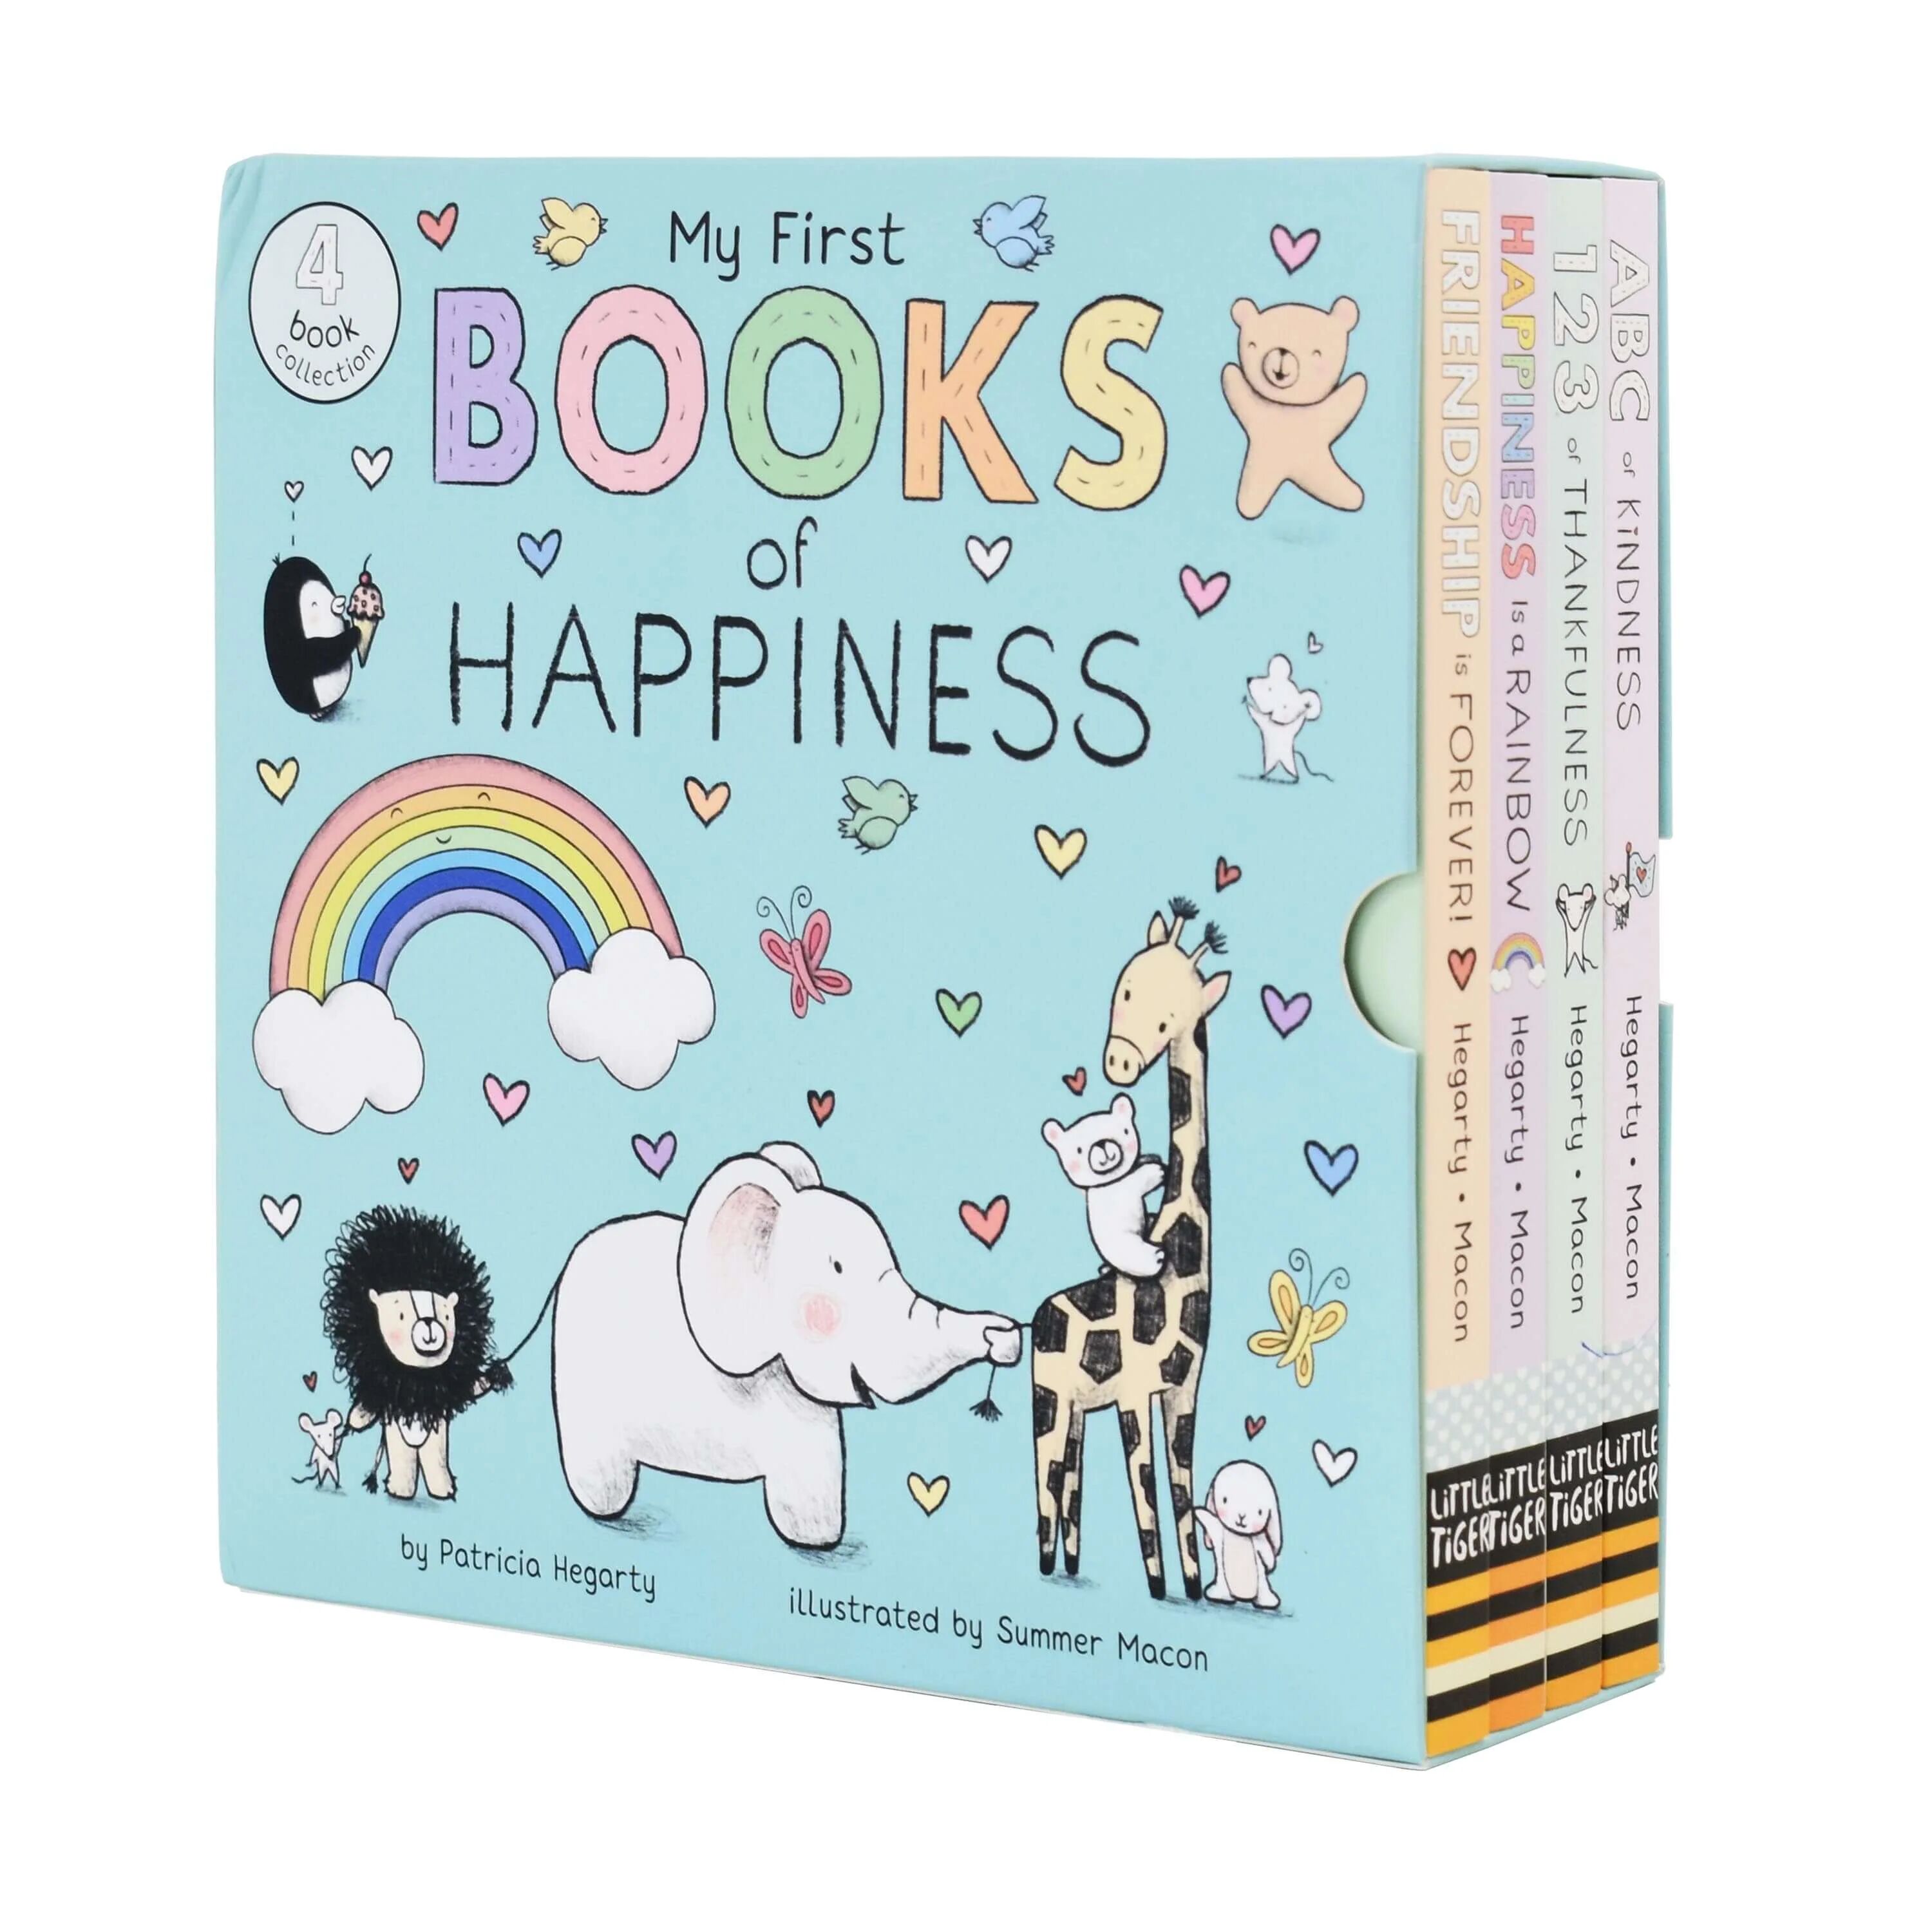 My First Books of Happiness 4 Books Collection Box Set by Patricia Hegarty - Ages 0-5 - Hardback Little Tiger Press Group